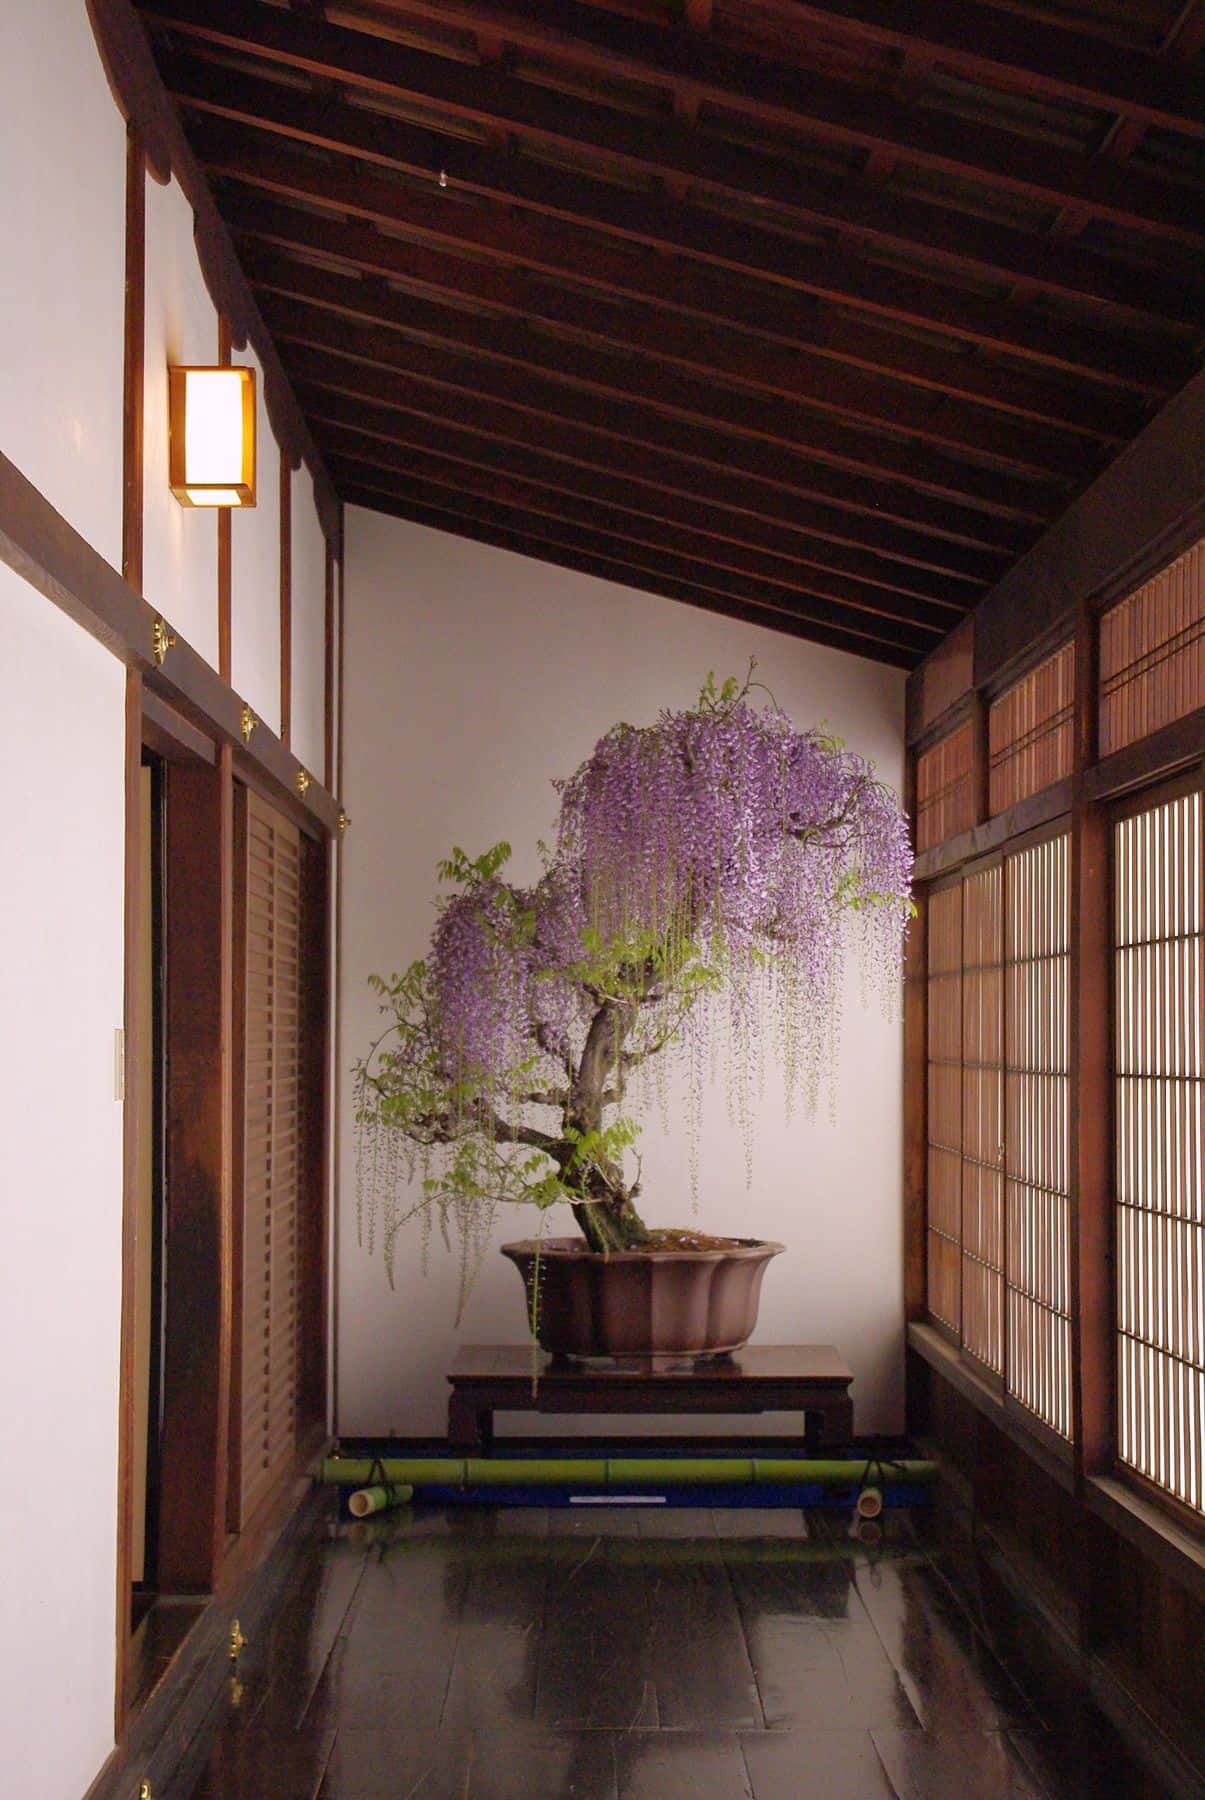 The Art of Bonsai - A Stunning, Ancient Tradition